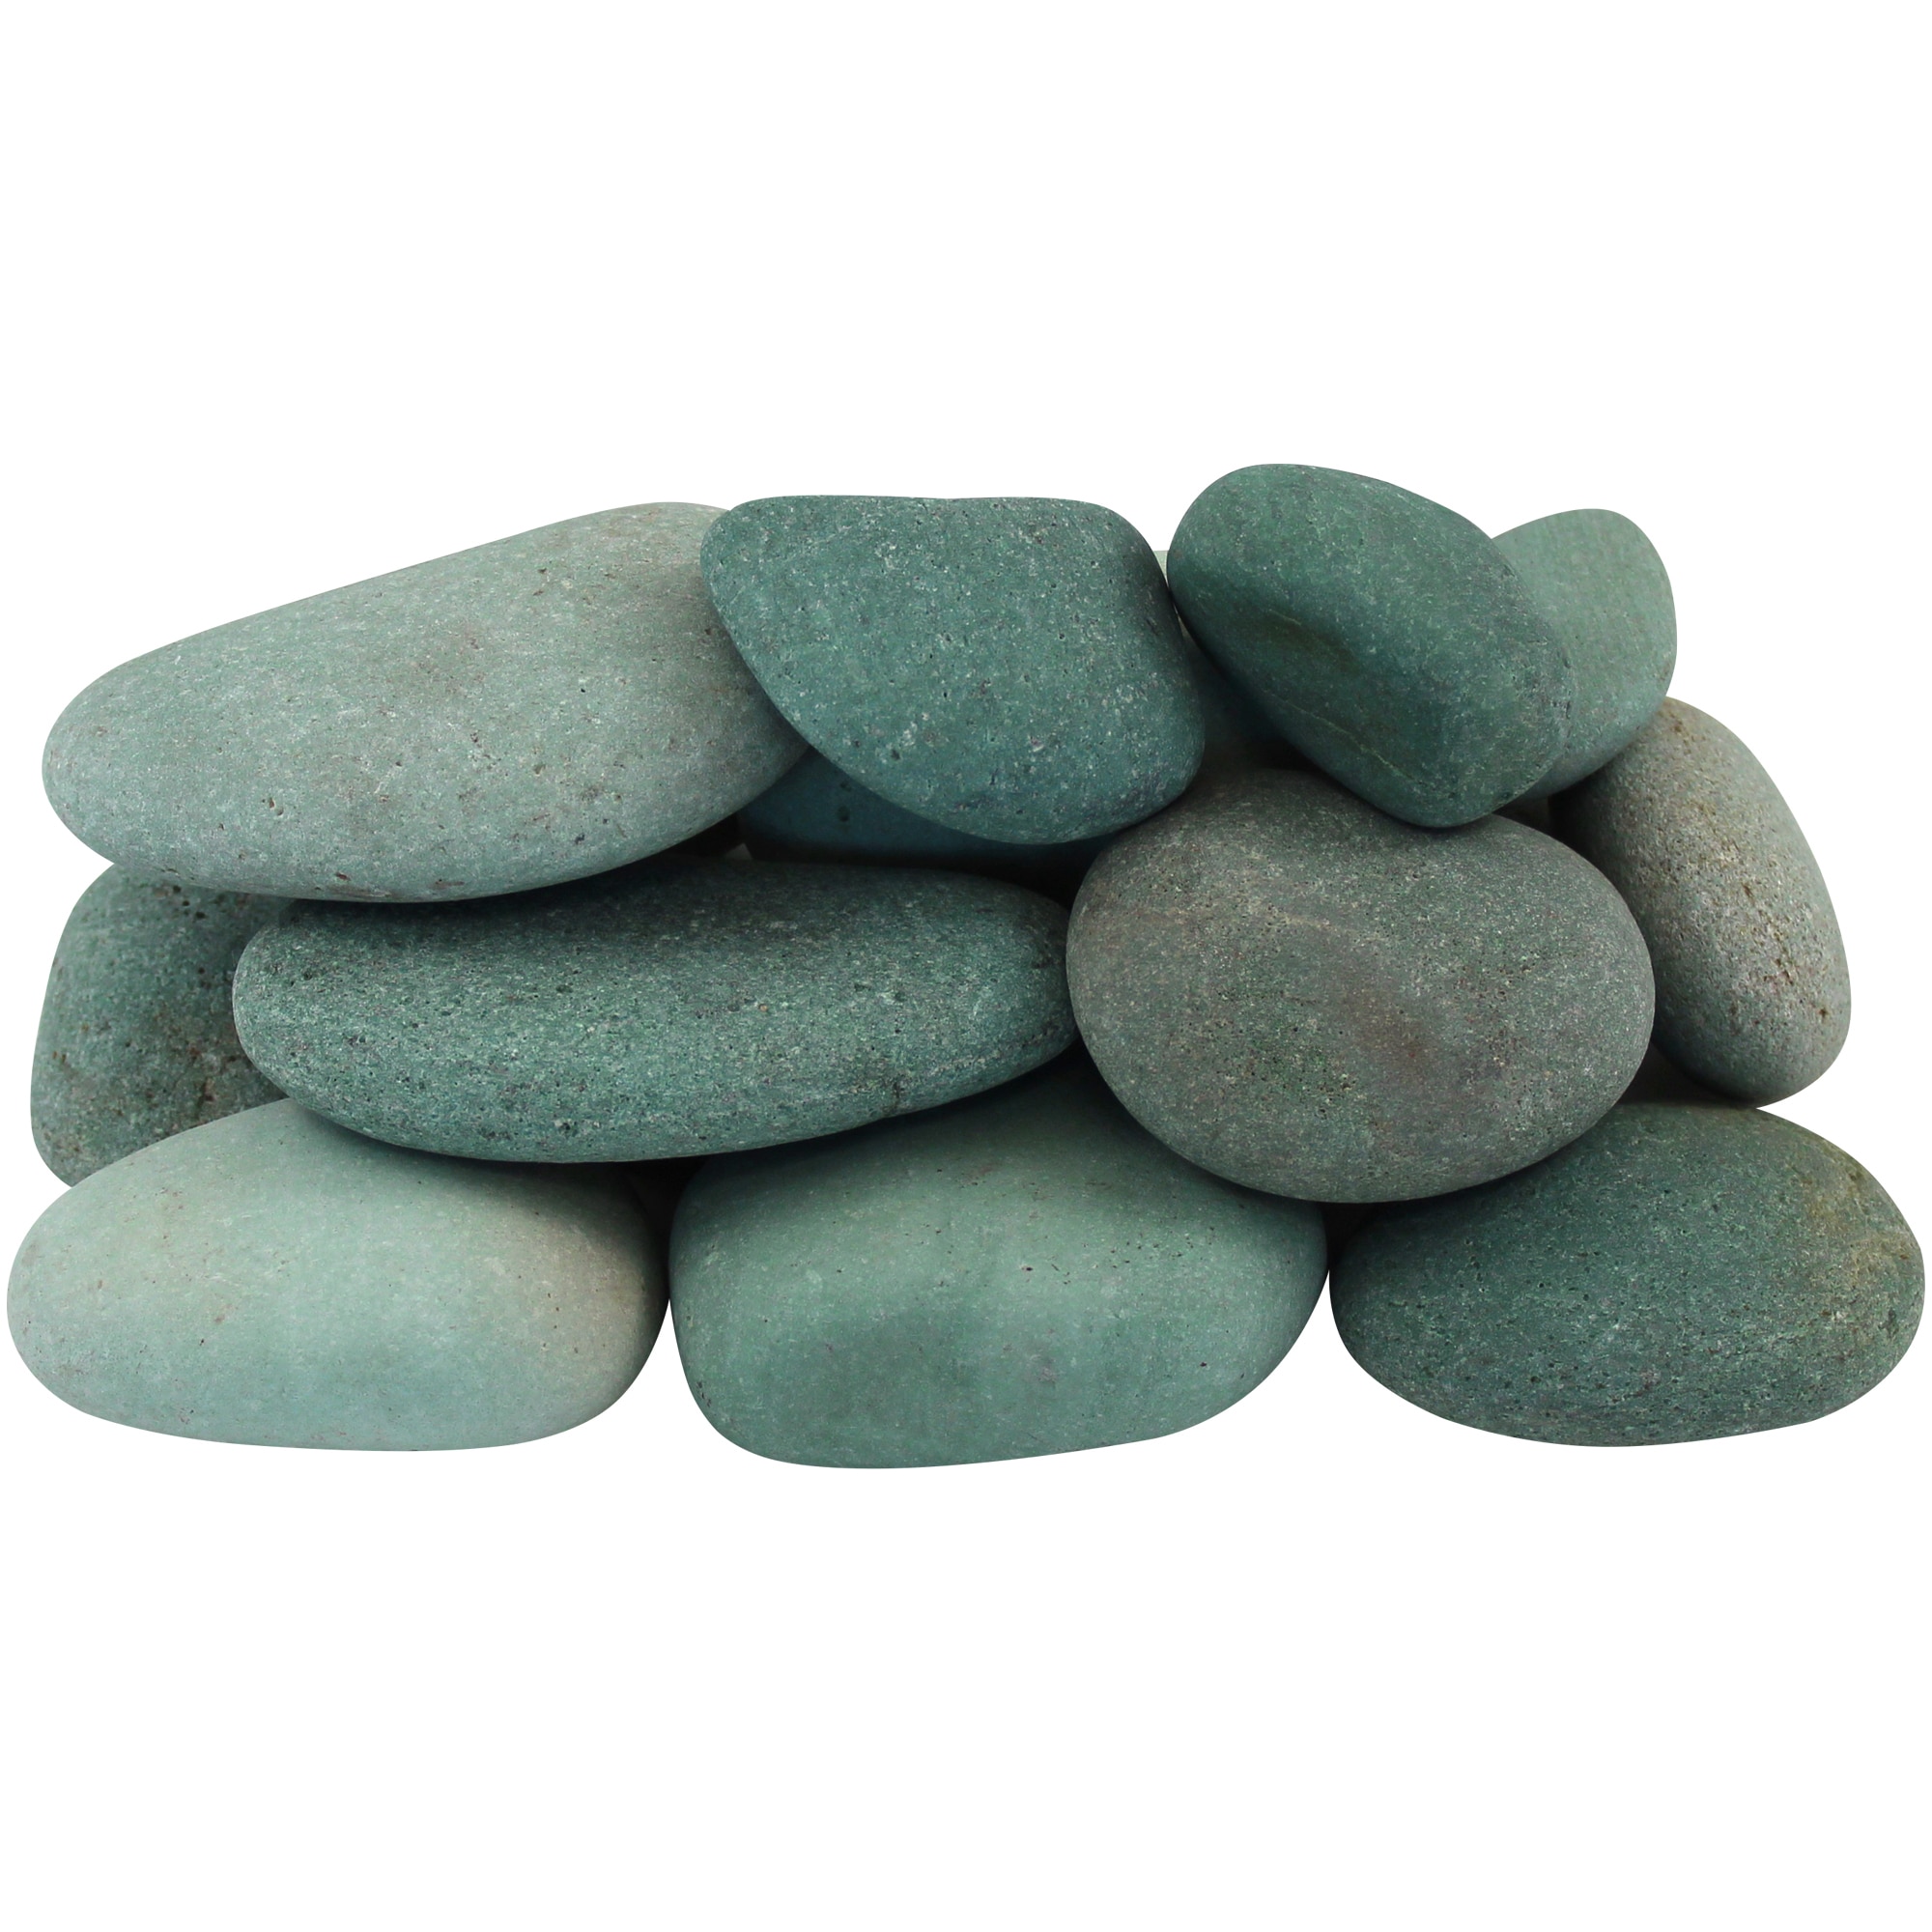 30 River Rocks for Painting, Painting Rocks Bulk, Smooth Rocks for Painting, Natural Stones